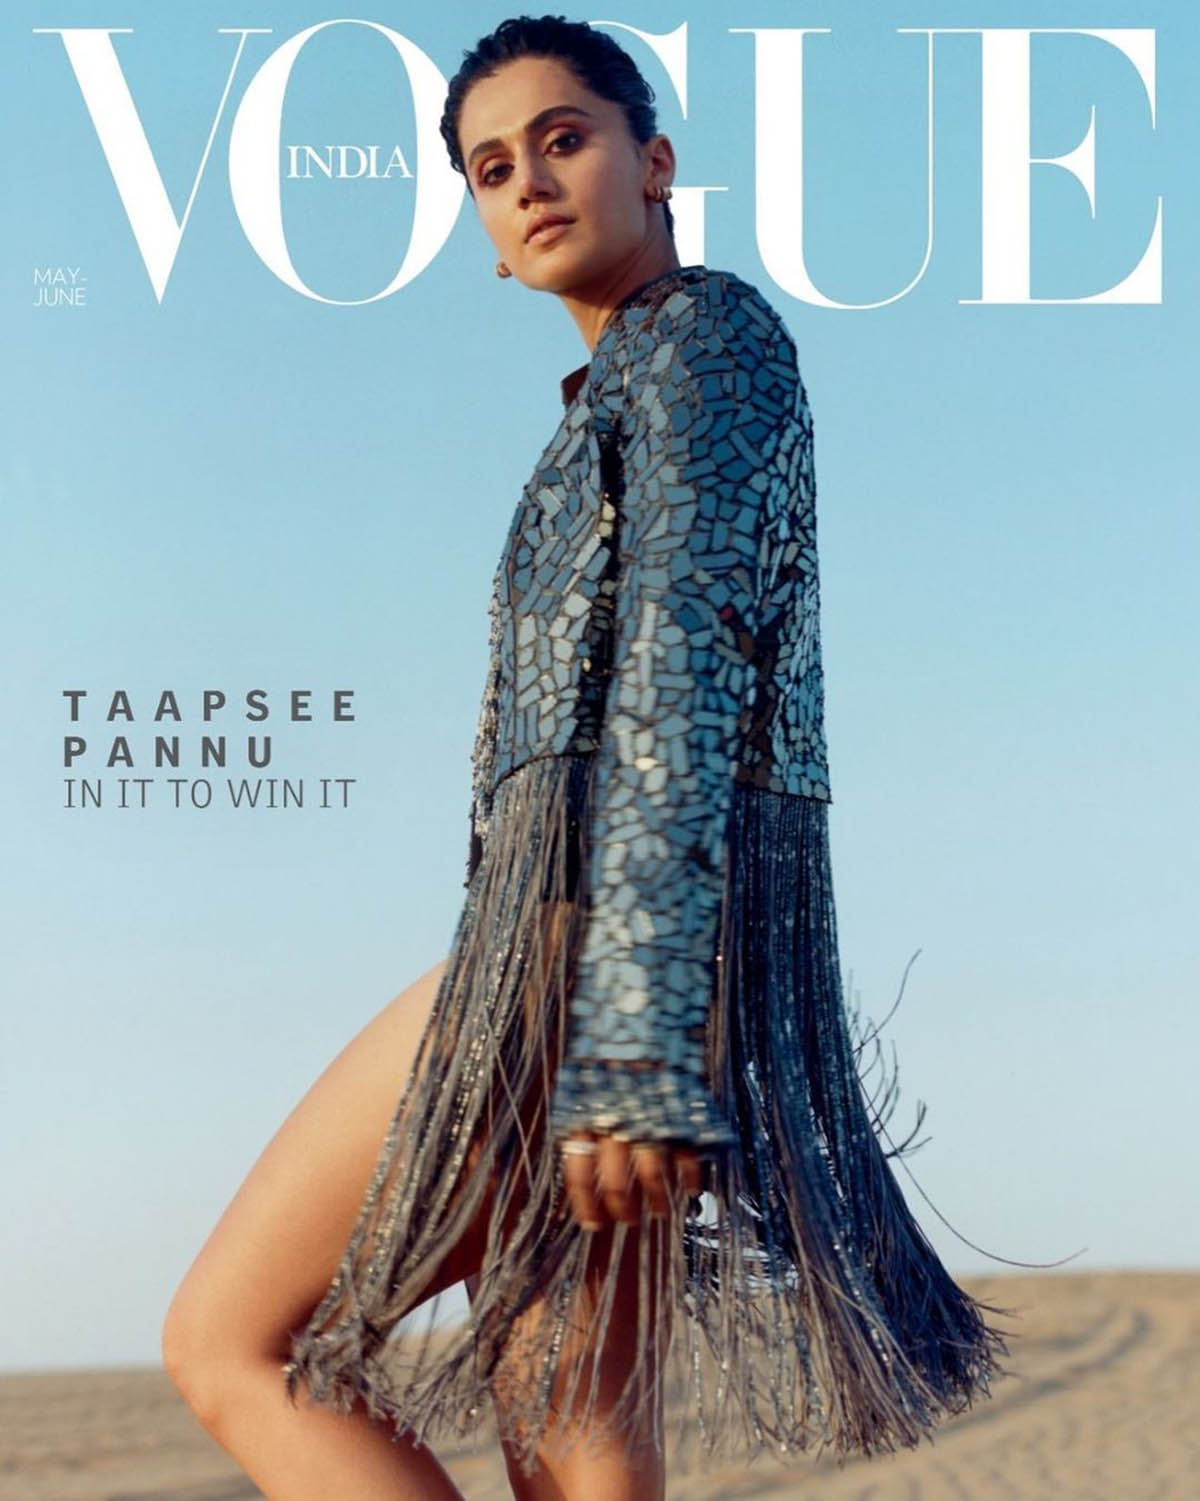 Taapsee Pannu covers Vogue India May June 2021 by Bikramjit Bose